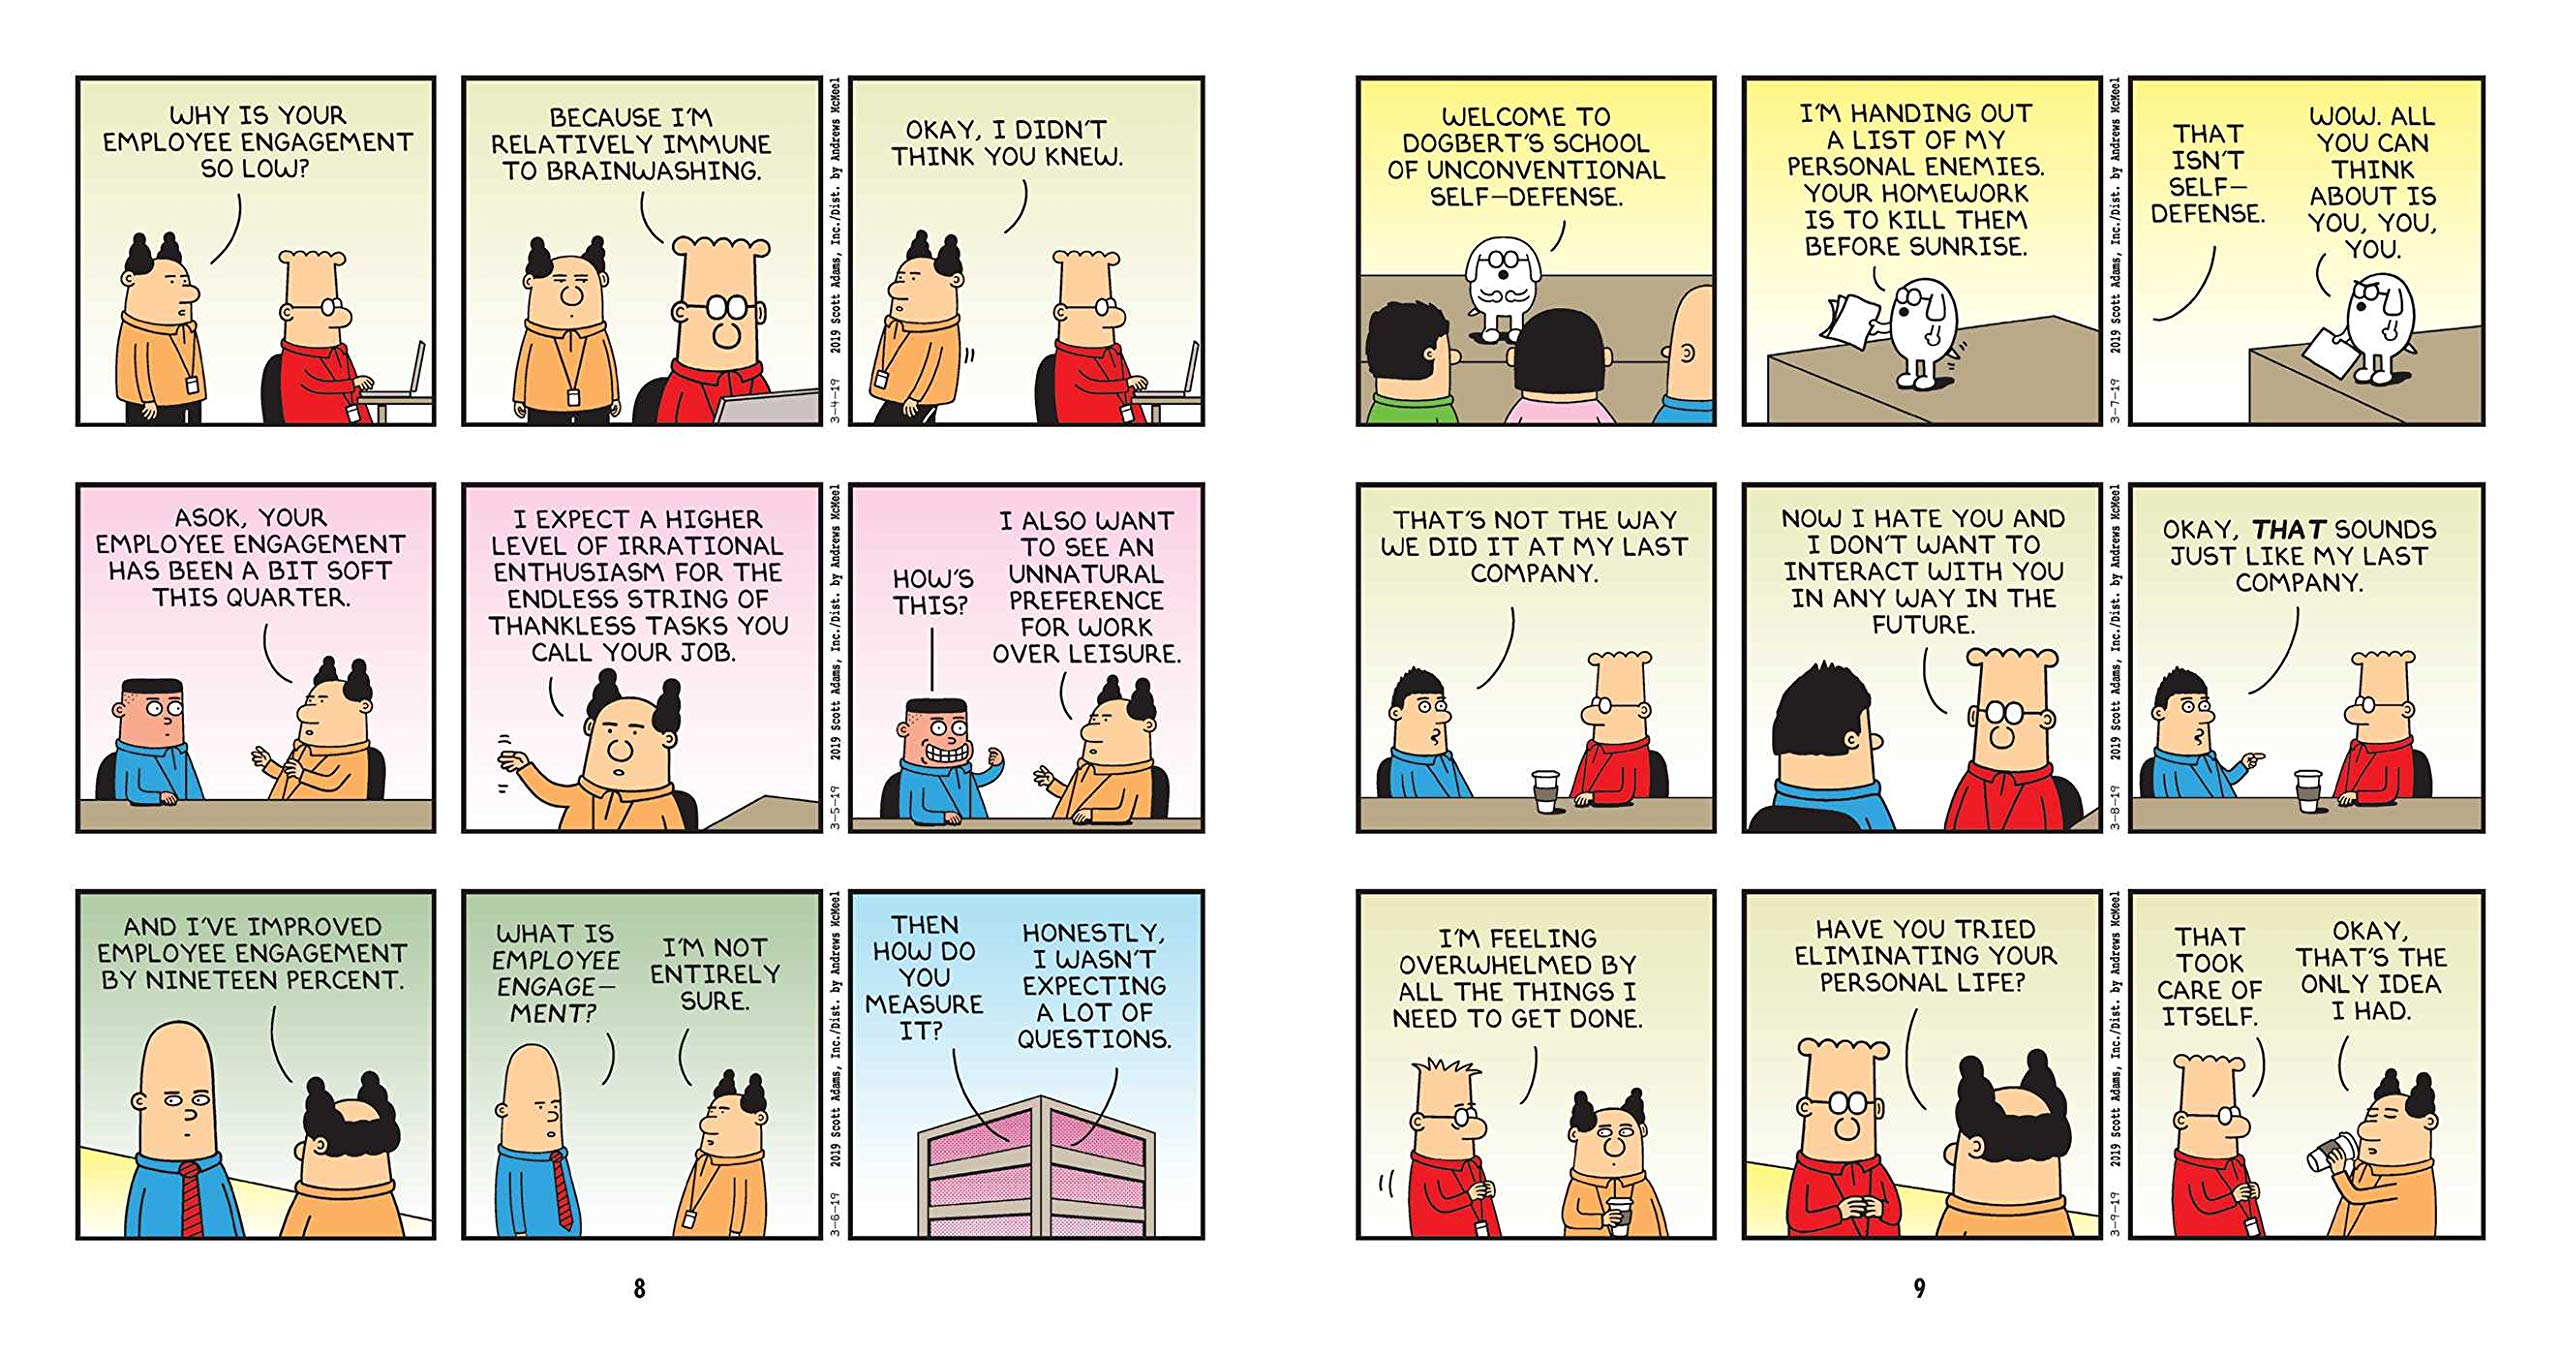 Eagerly Awaiting Your Irrational Response | Scott Adams